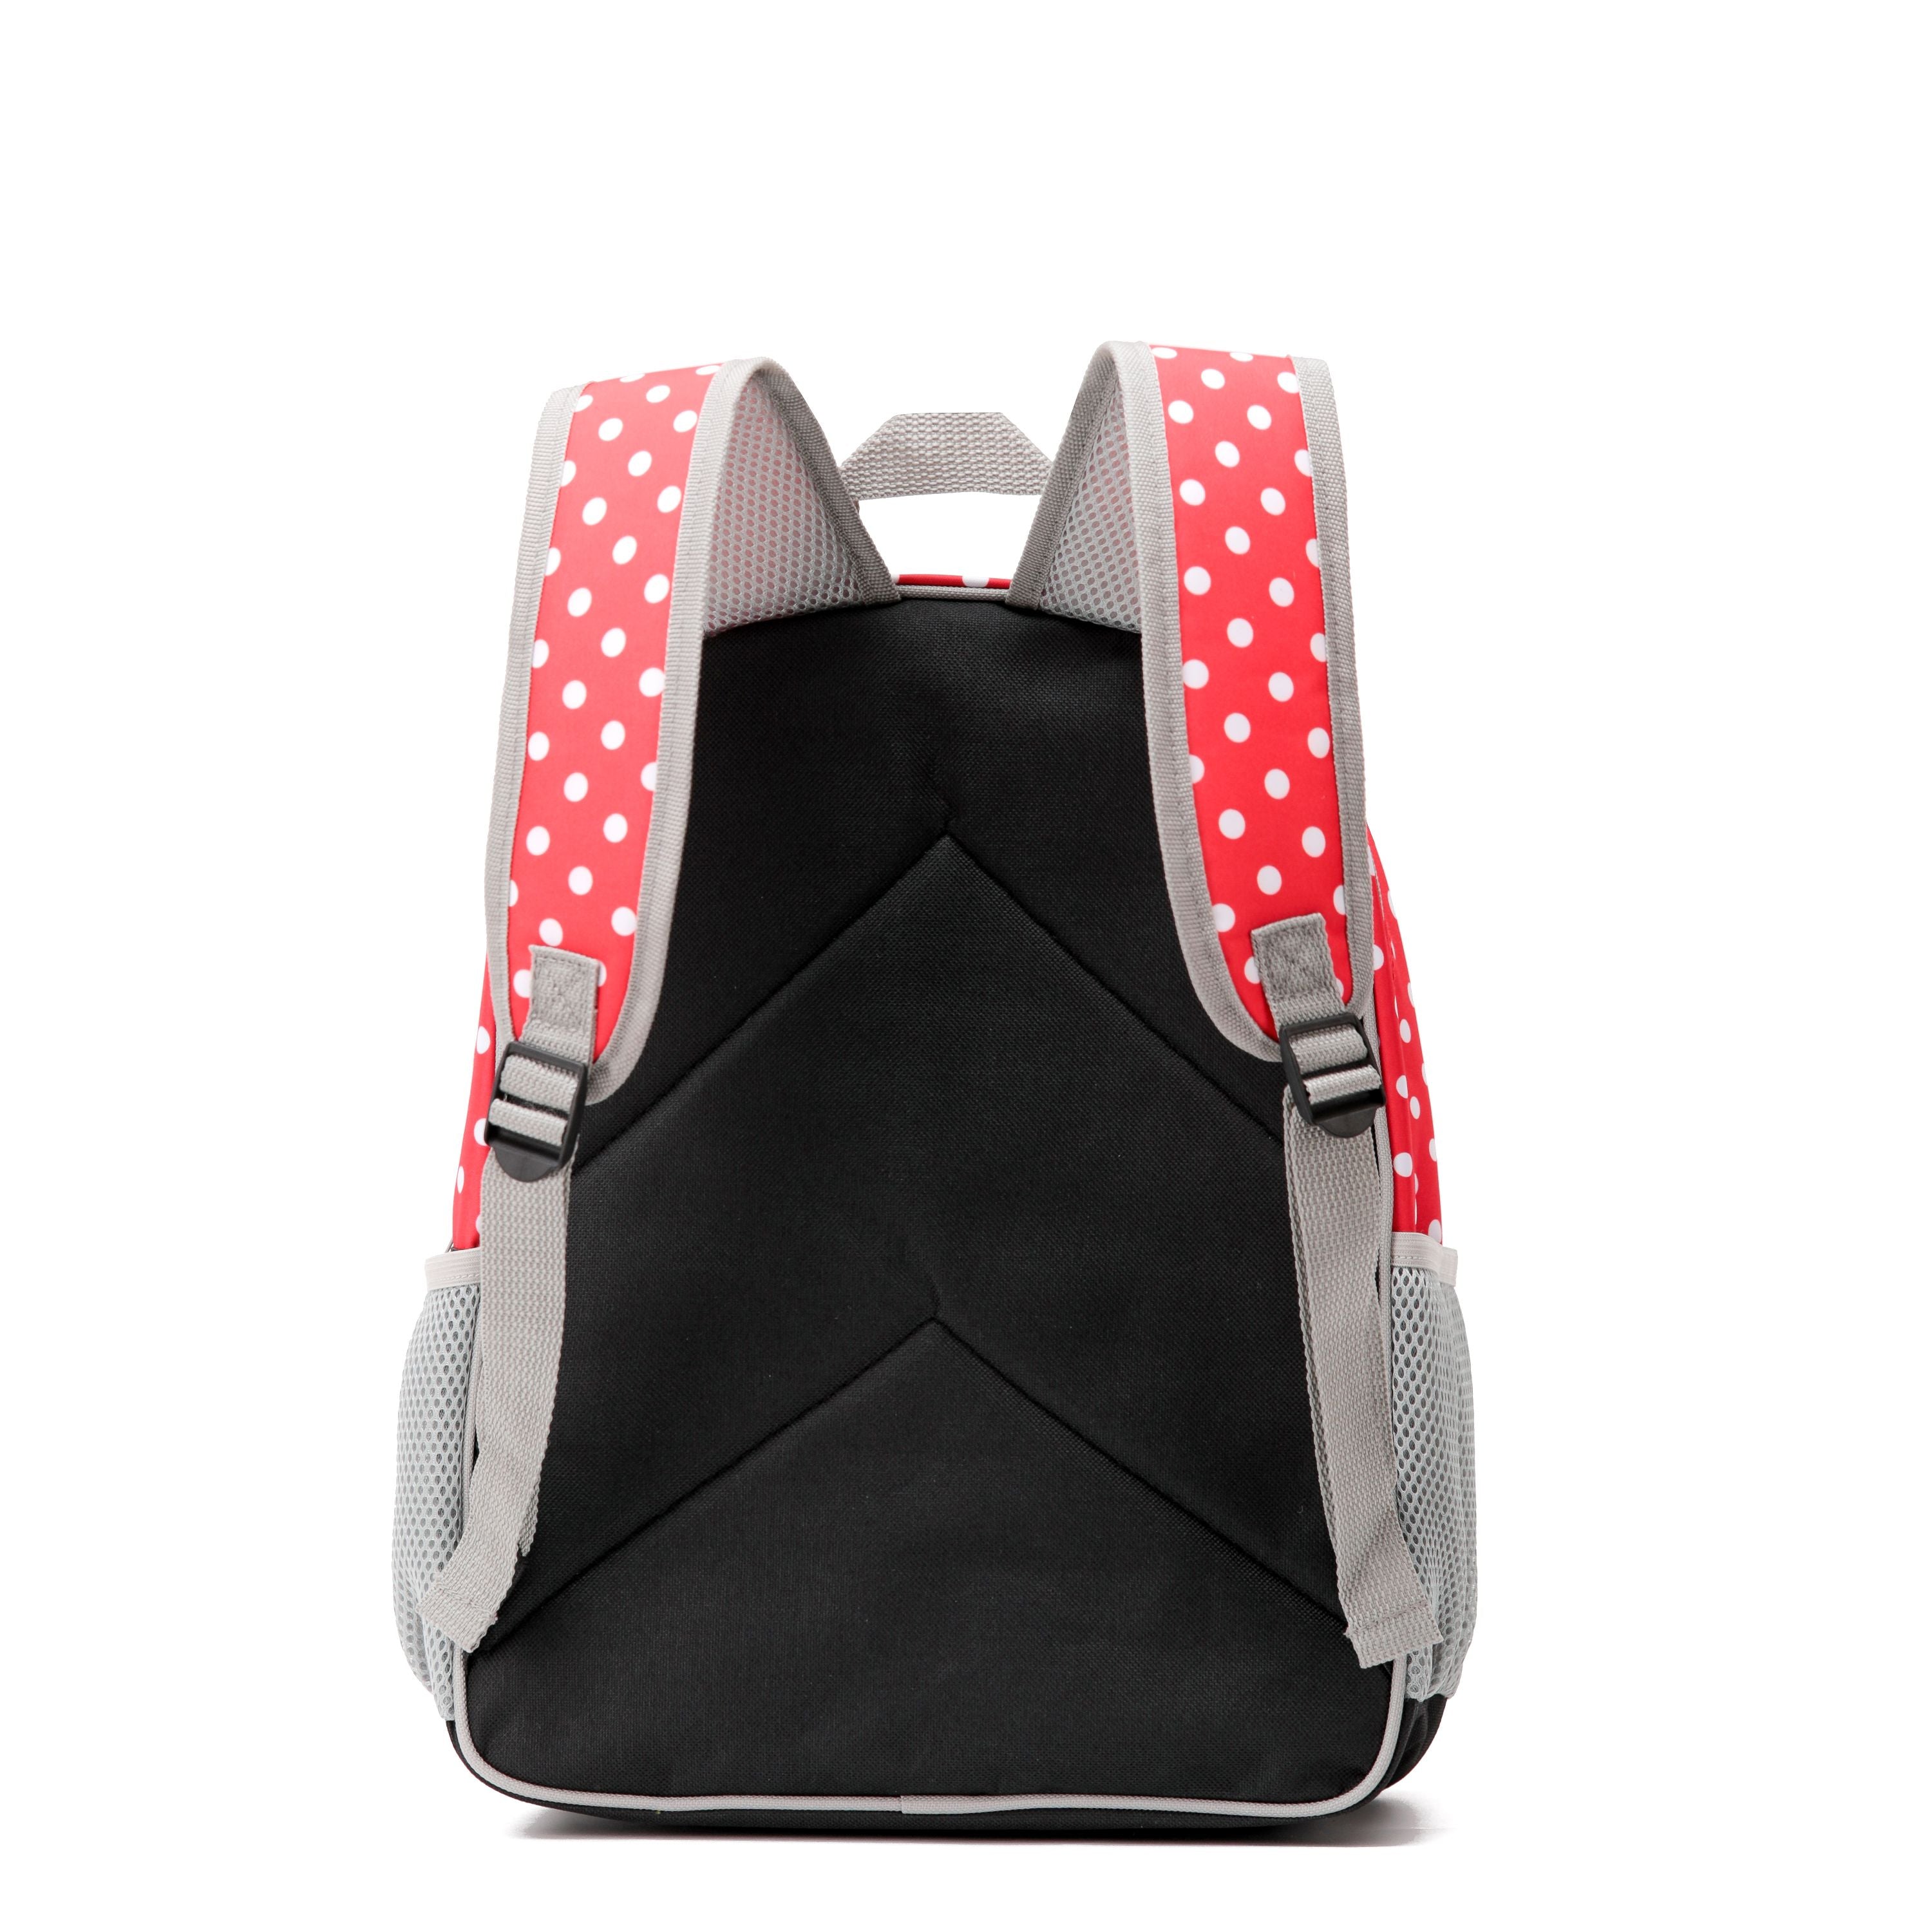 Disney - Minnie Mouse Dis215 15in Hologram backpack - Black/Red - 0